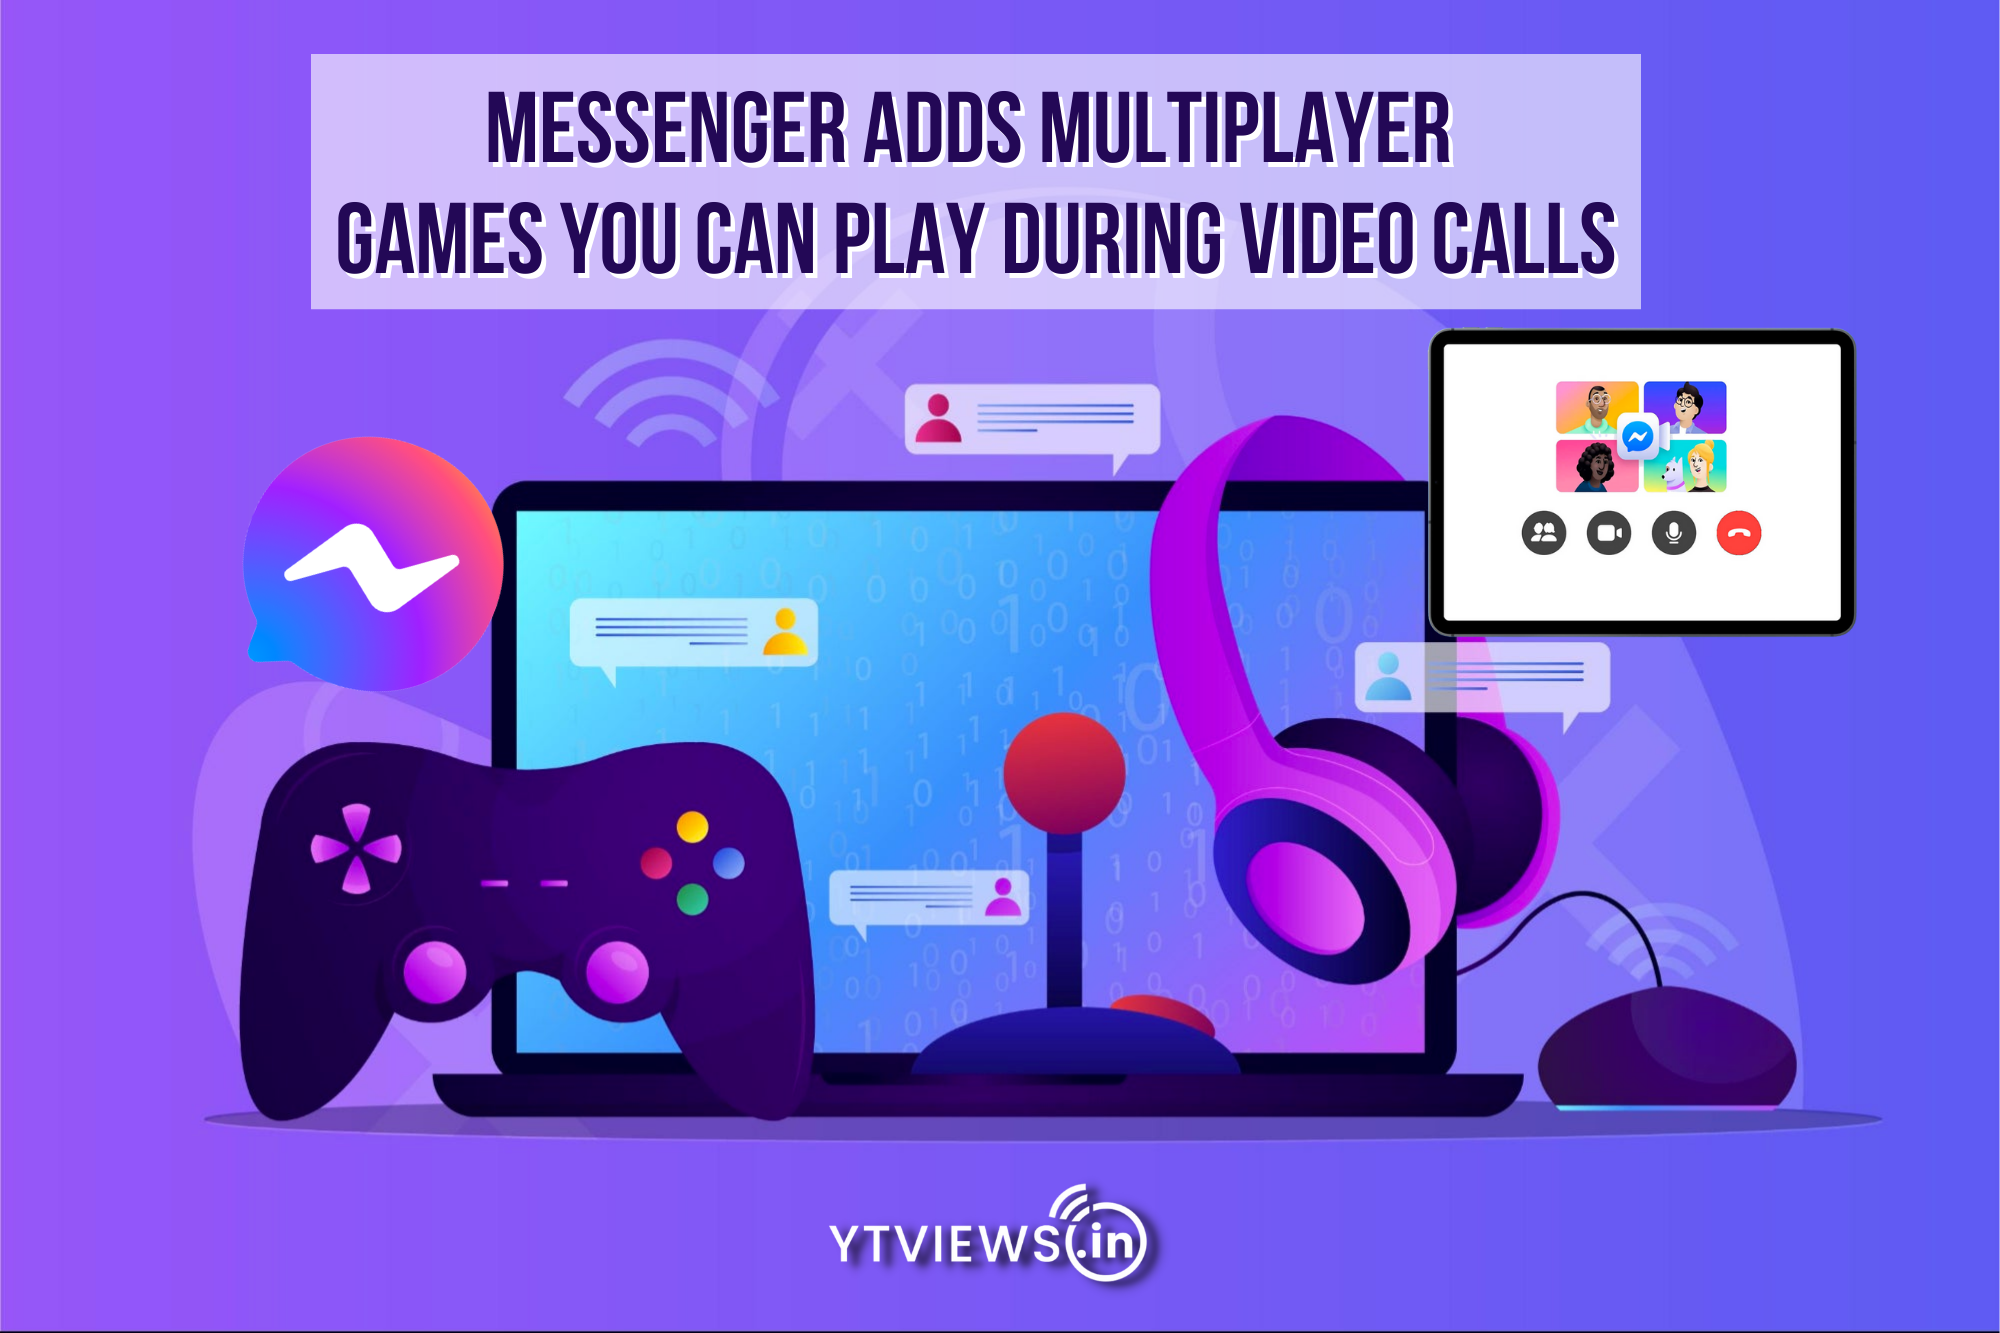 Messenger adds multiplayer games you can play during video calls